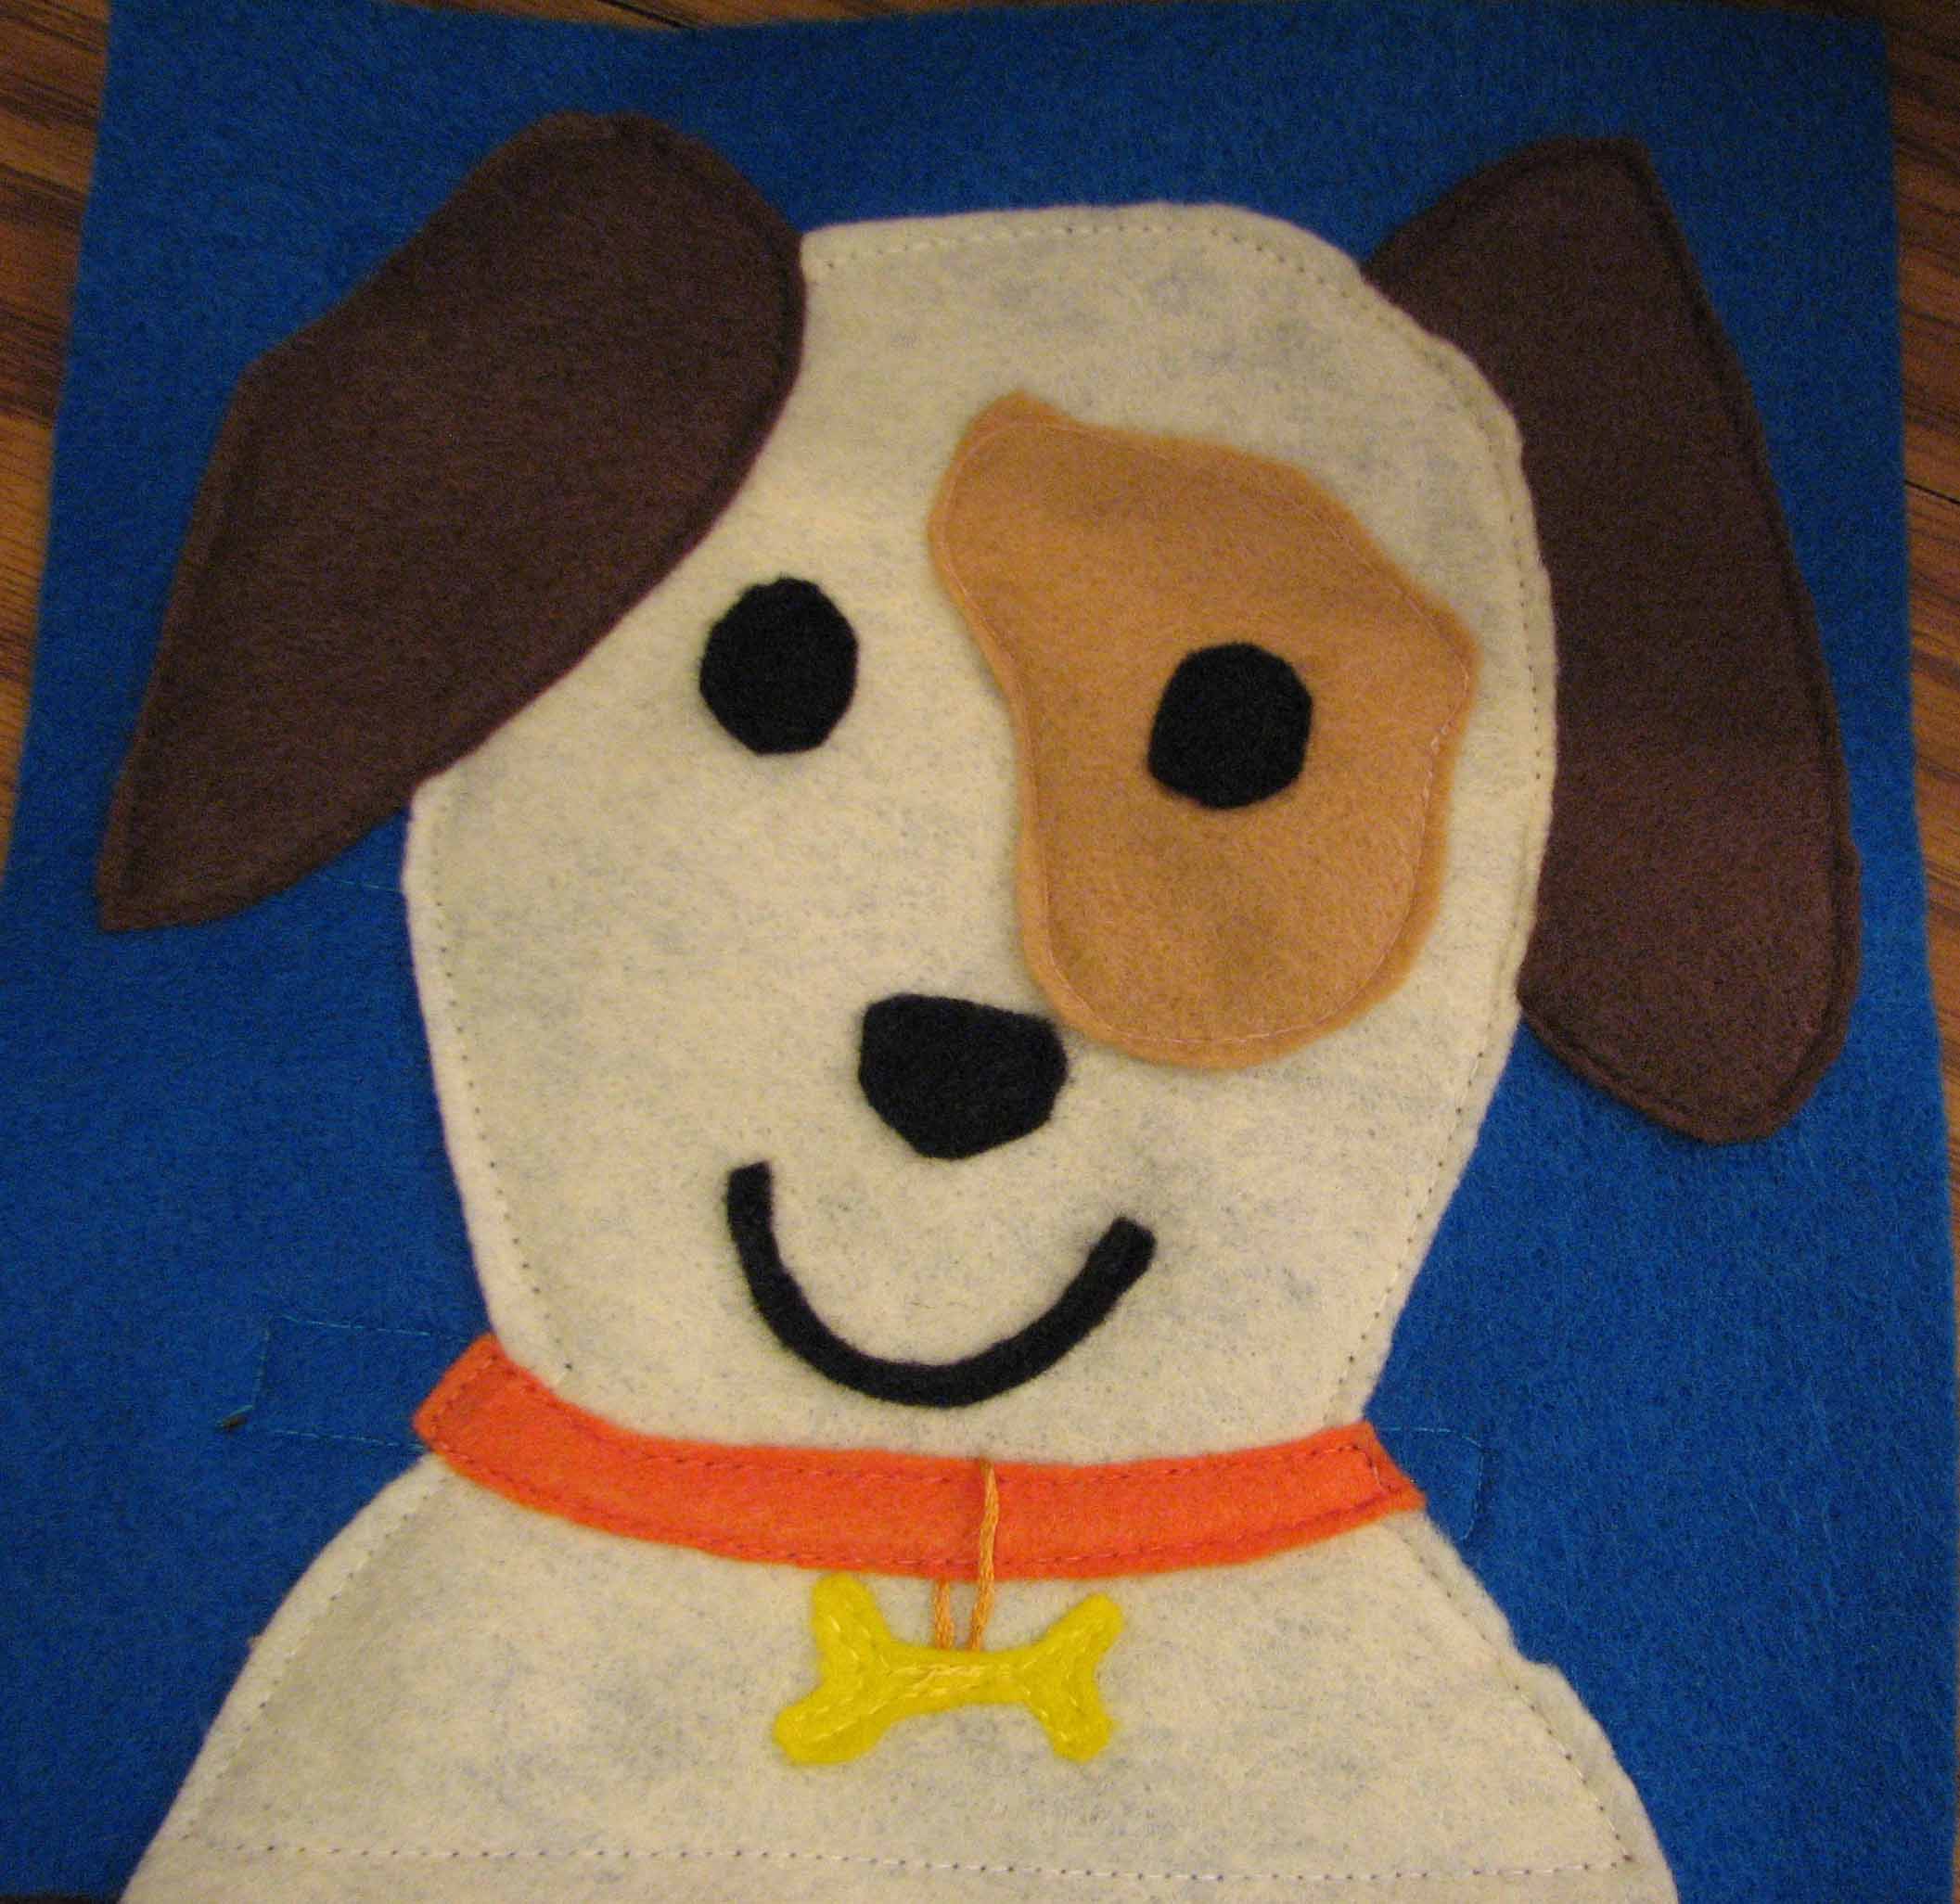 Felt Dog Puzzle quiet book page.  Busy book ideas at RoseBottomDiapers.com